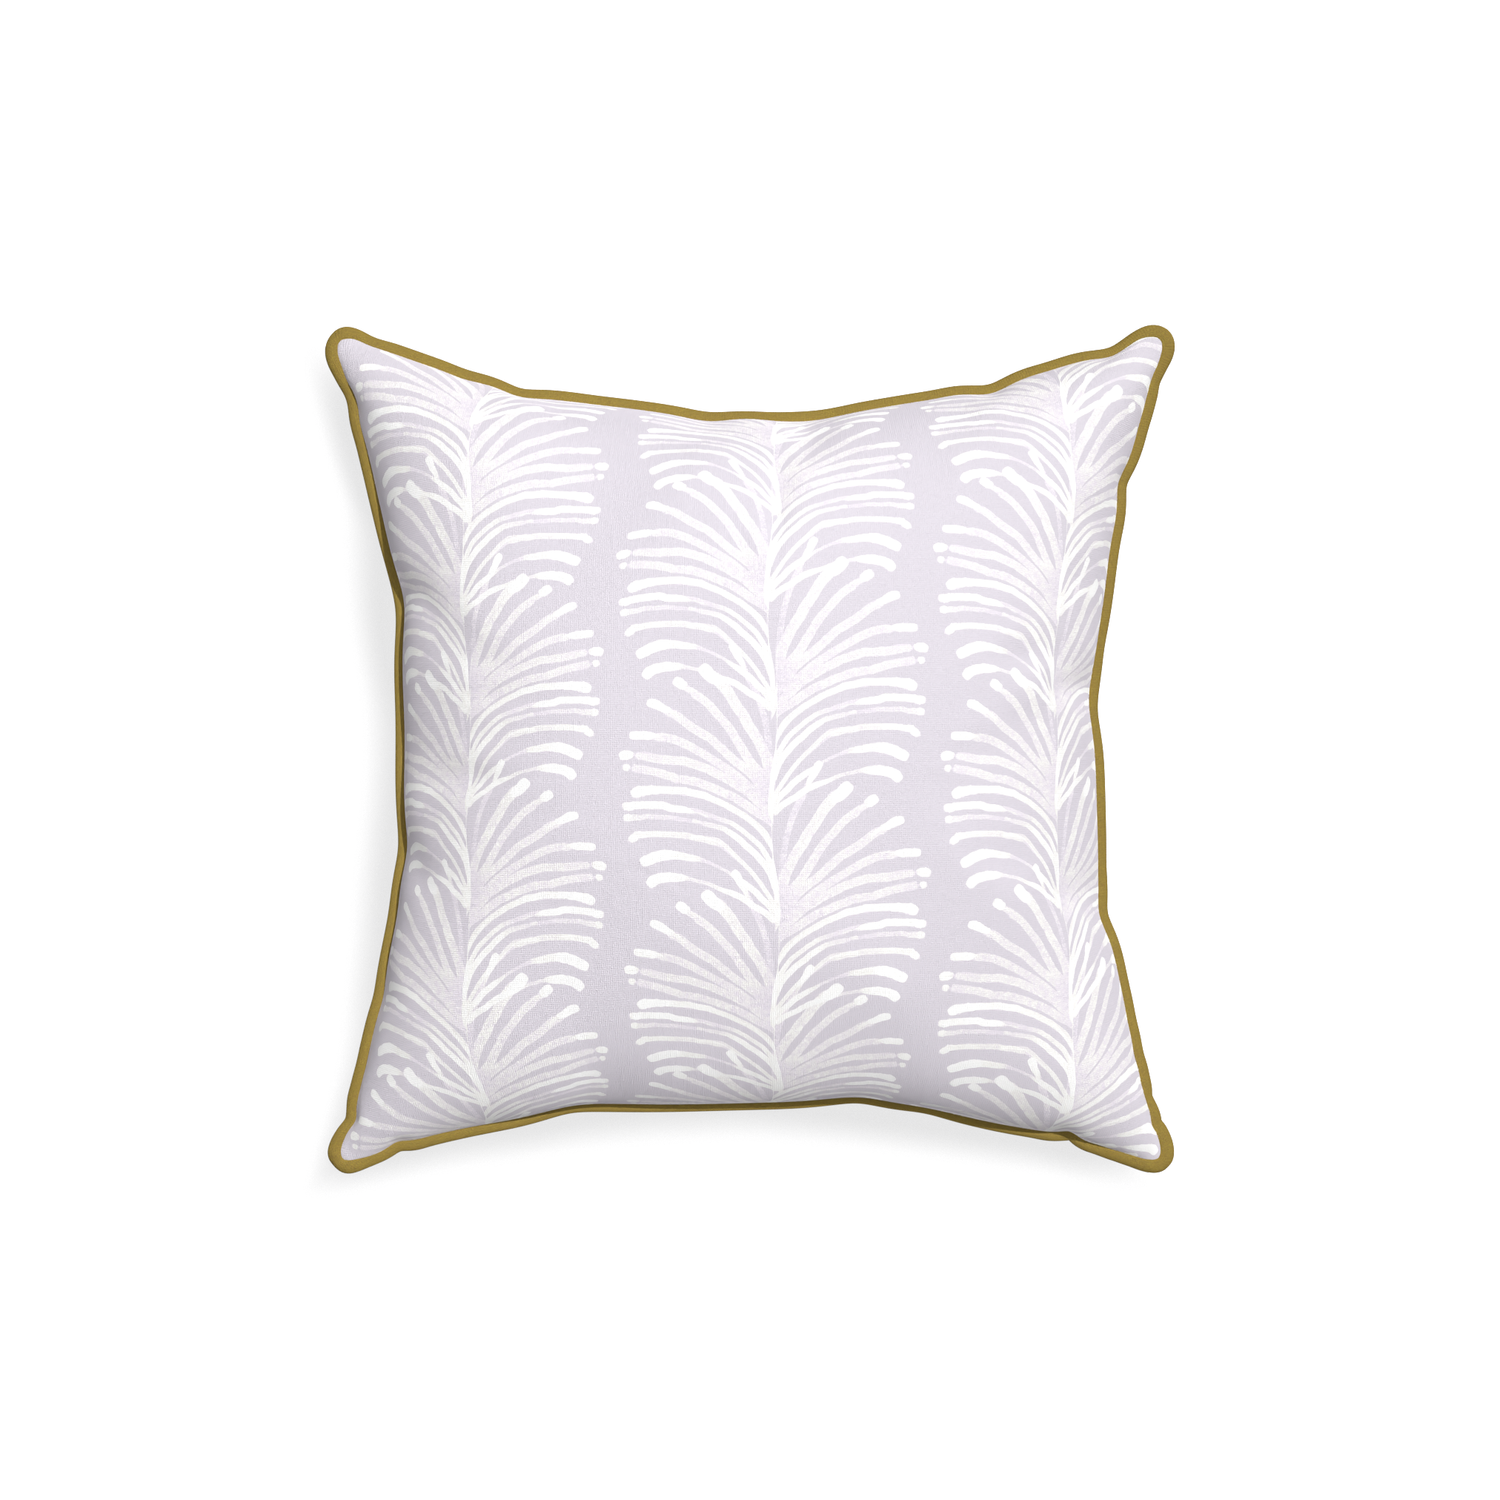 18-square emma lavender custom lavender botanical stripepillow with c piping on white background